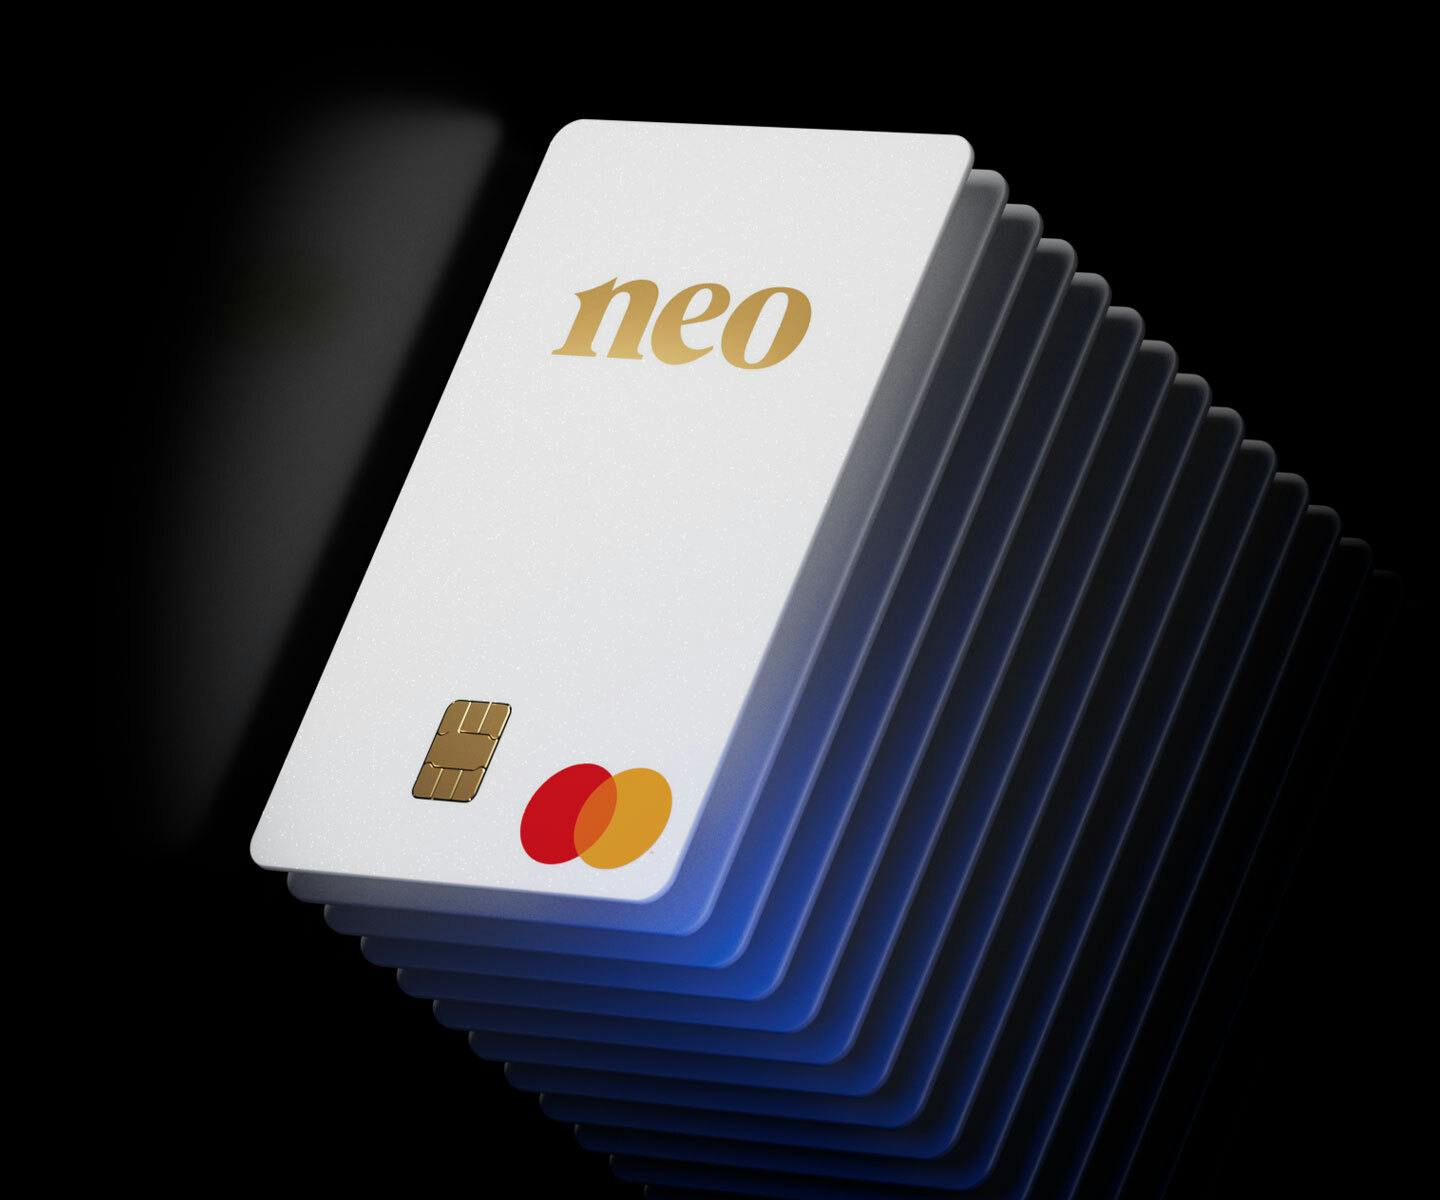 Neo Secured Credit Card